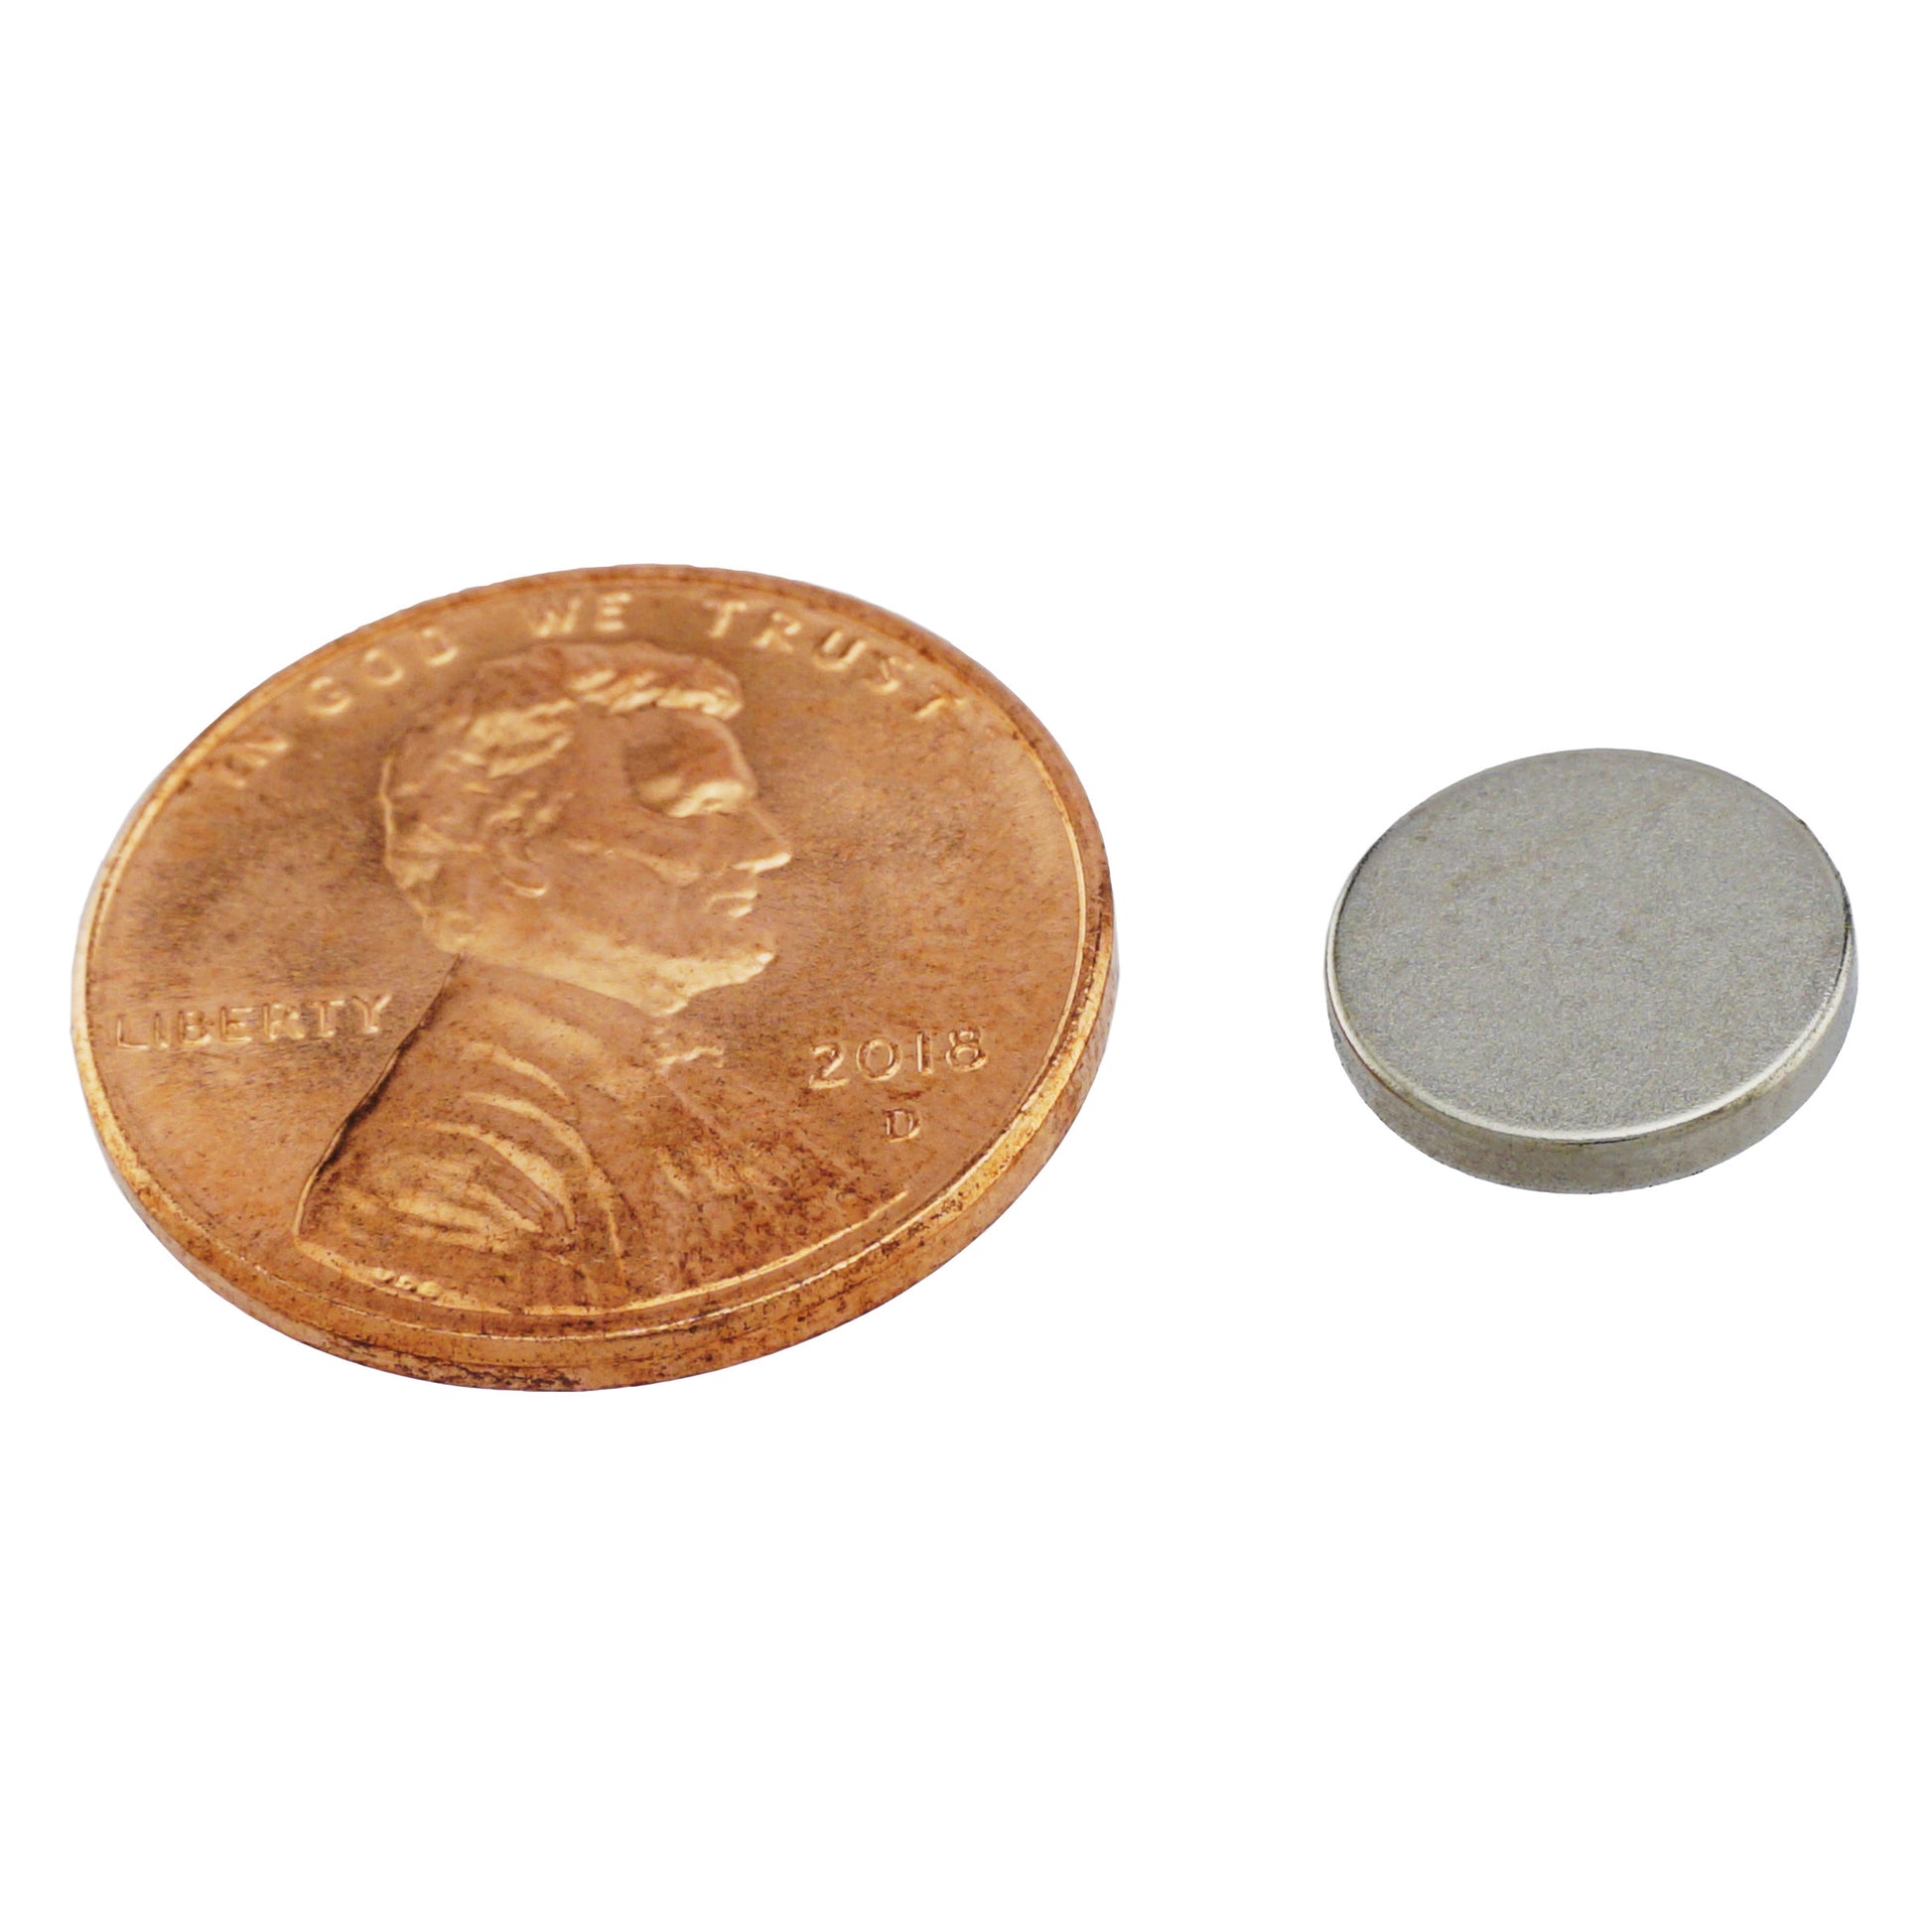 Load image into Gallery viewer, ND003735N Neodymium Disc Magnet - Compared to Penny for Size Reference